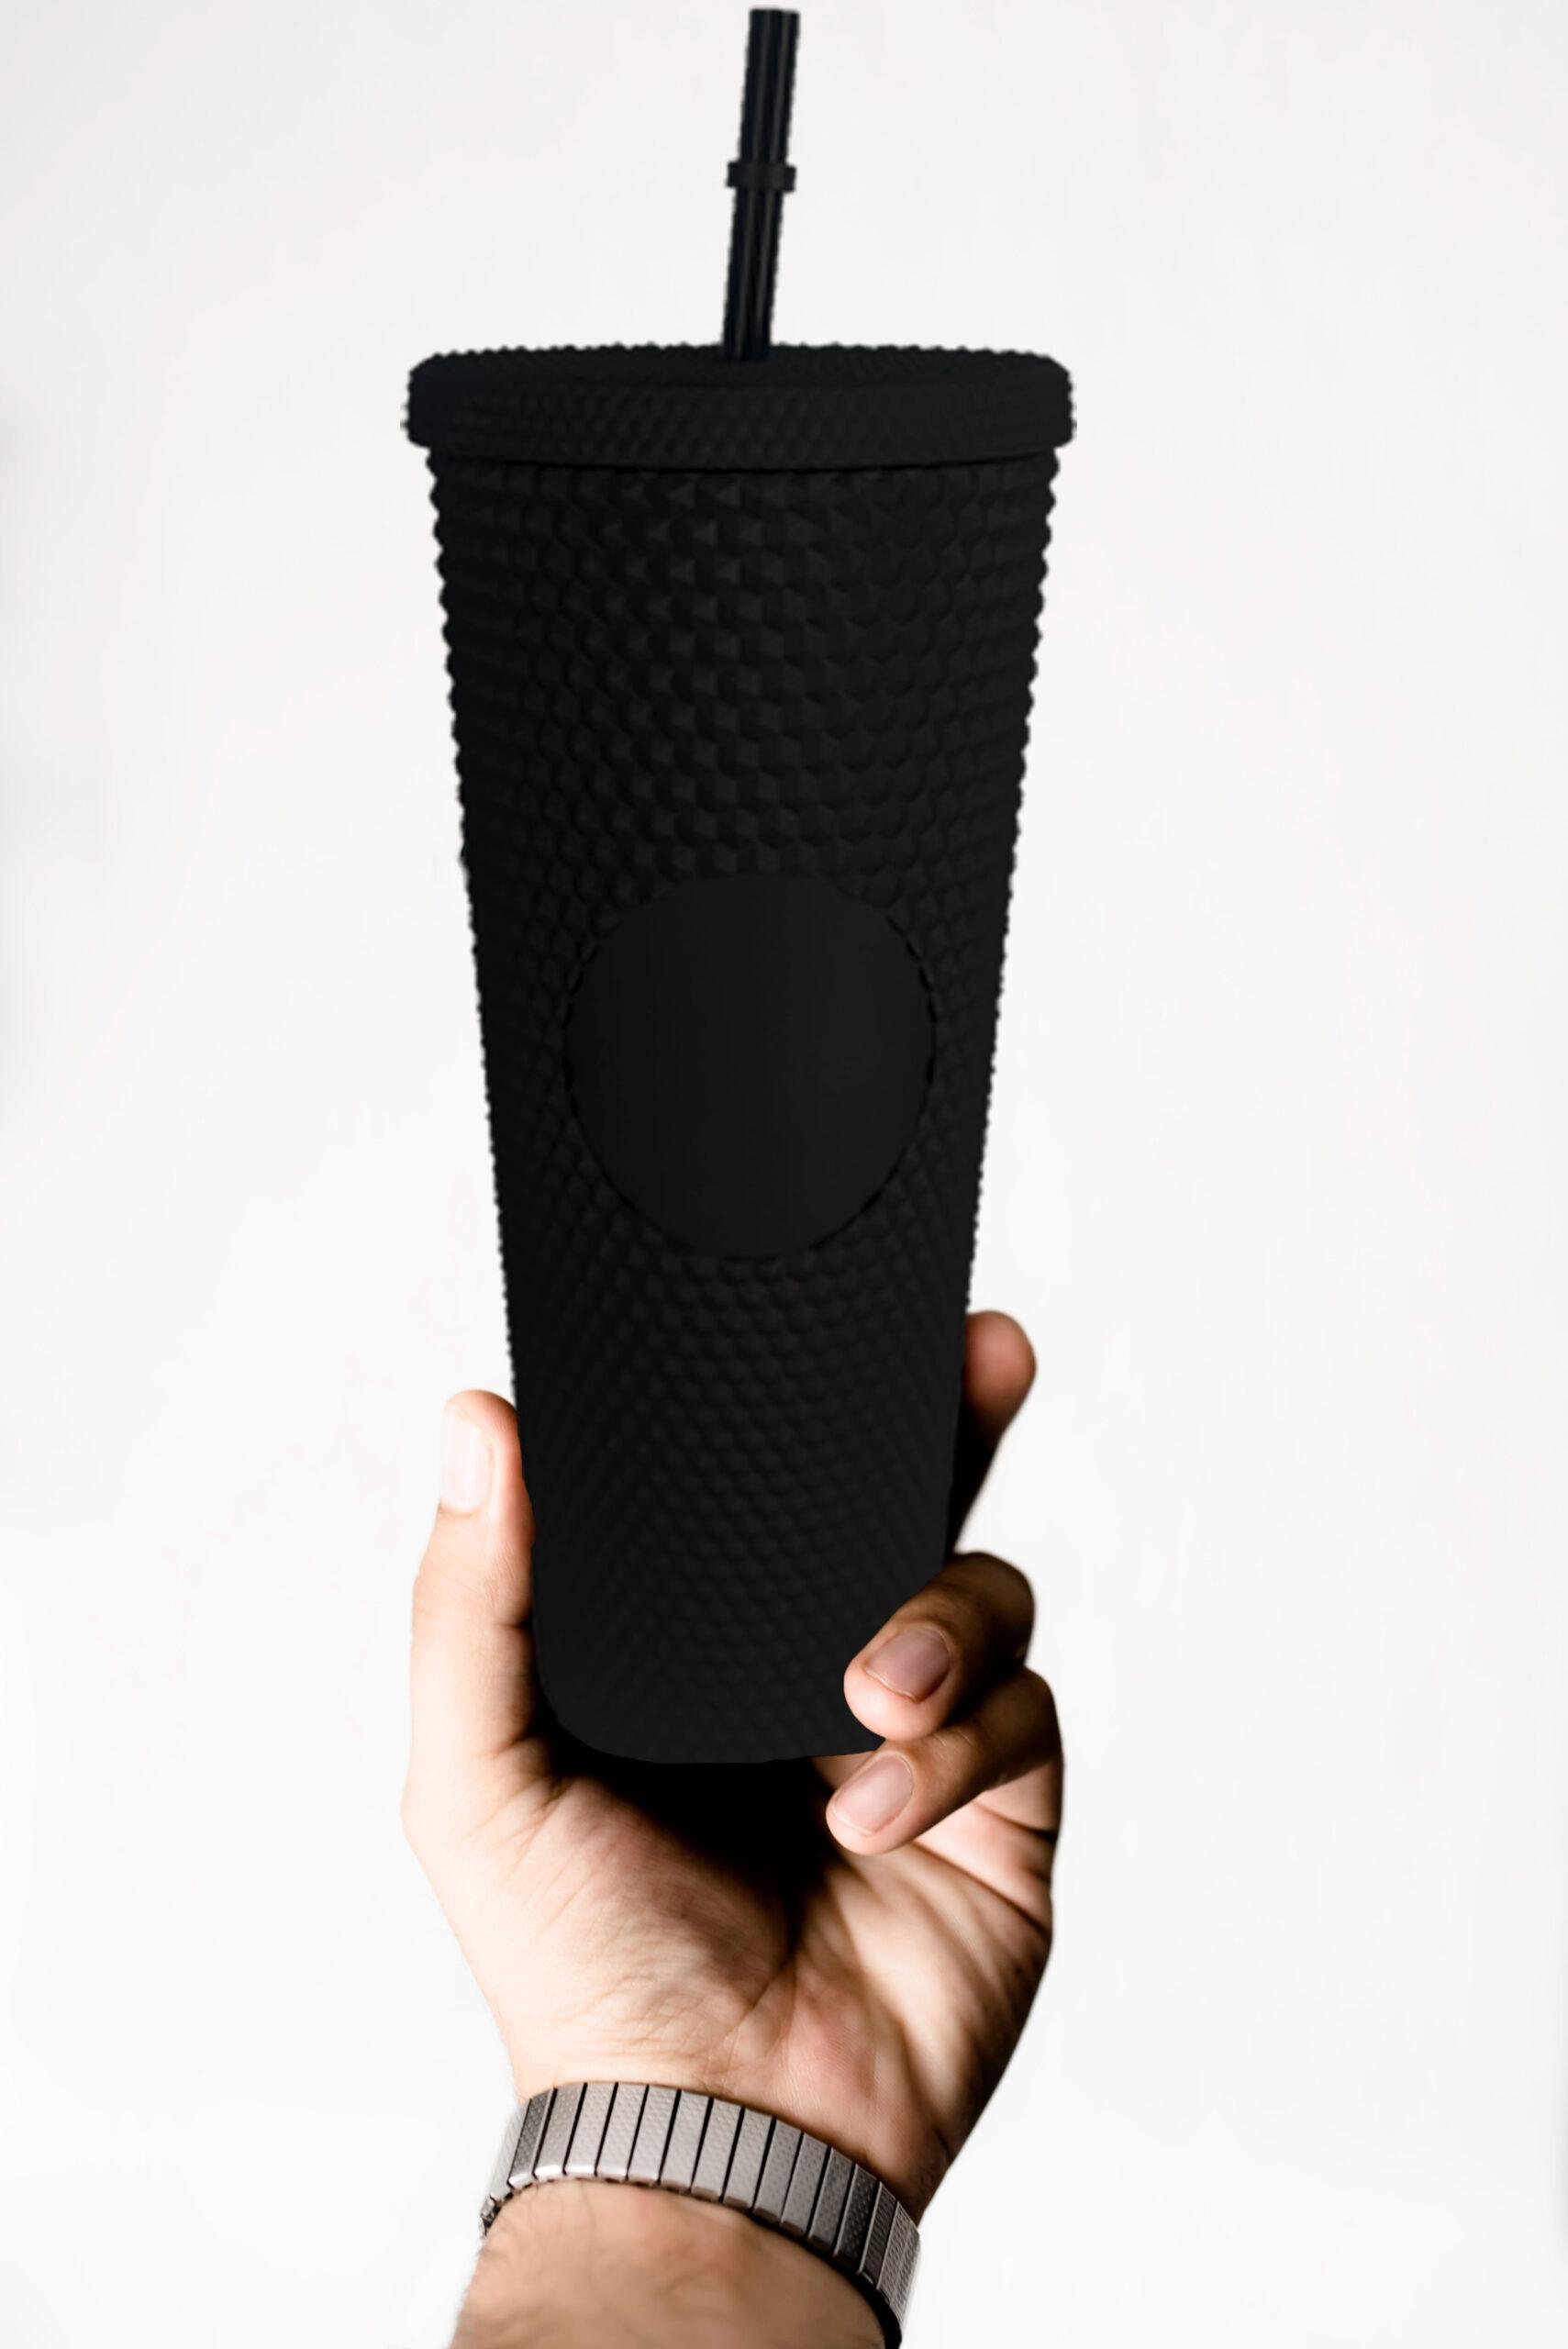 24oz Studded Matte Tumbler Double Wall Tumbler with Lid and Straw Textured Honeycomb Water Bottle Gives it a Super Soft Touch